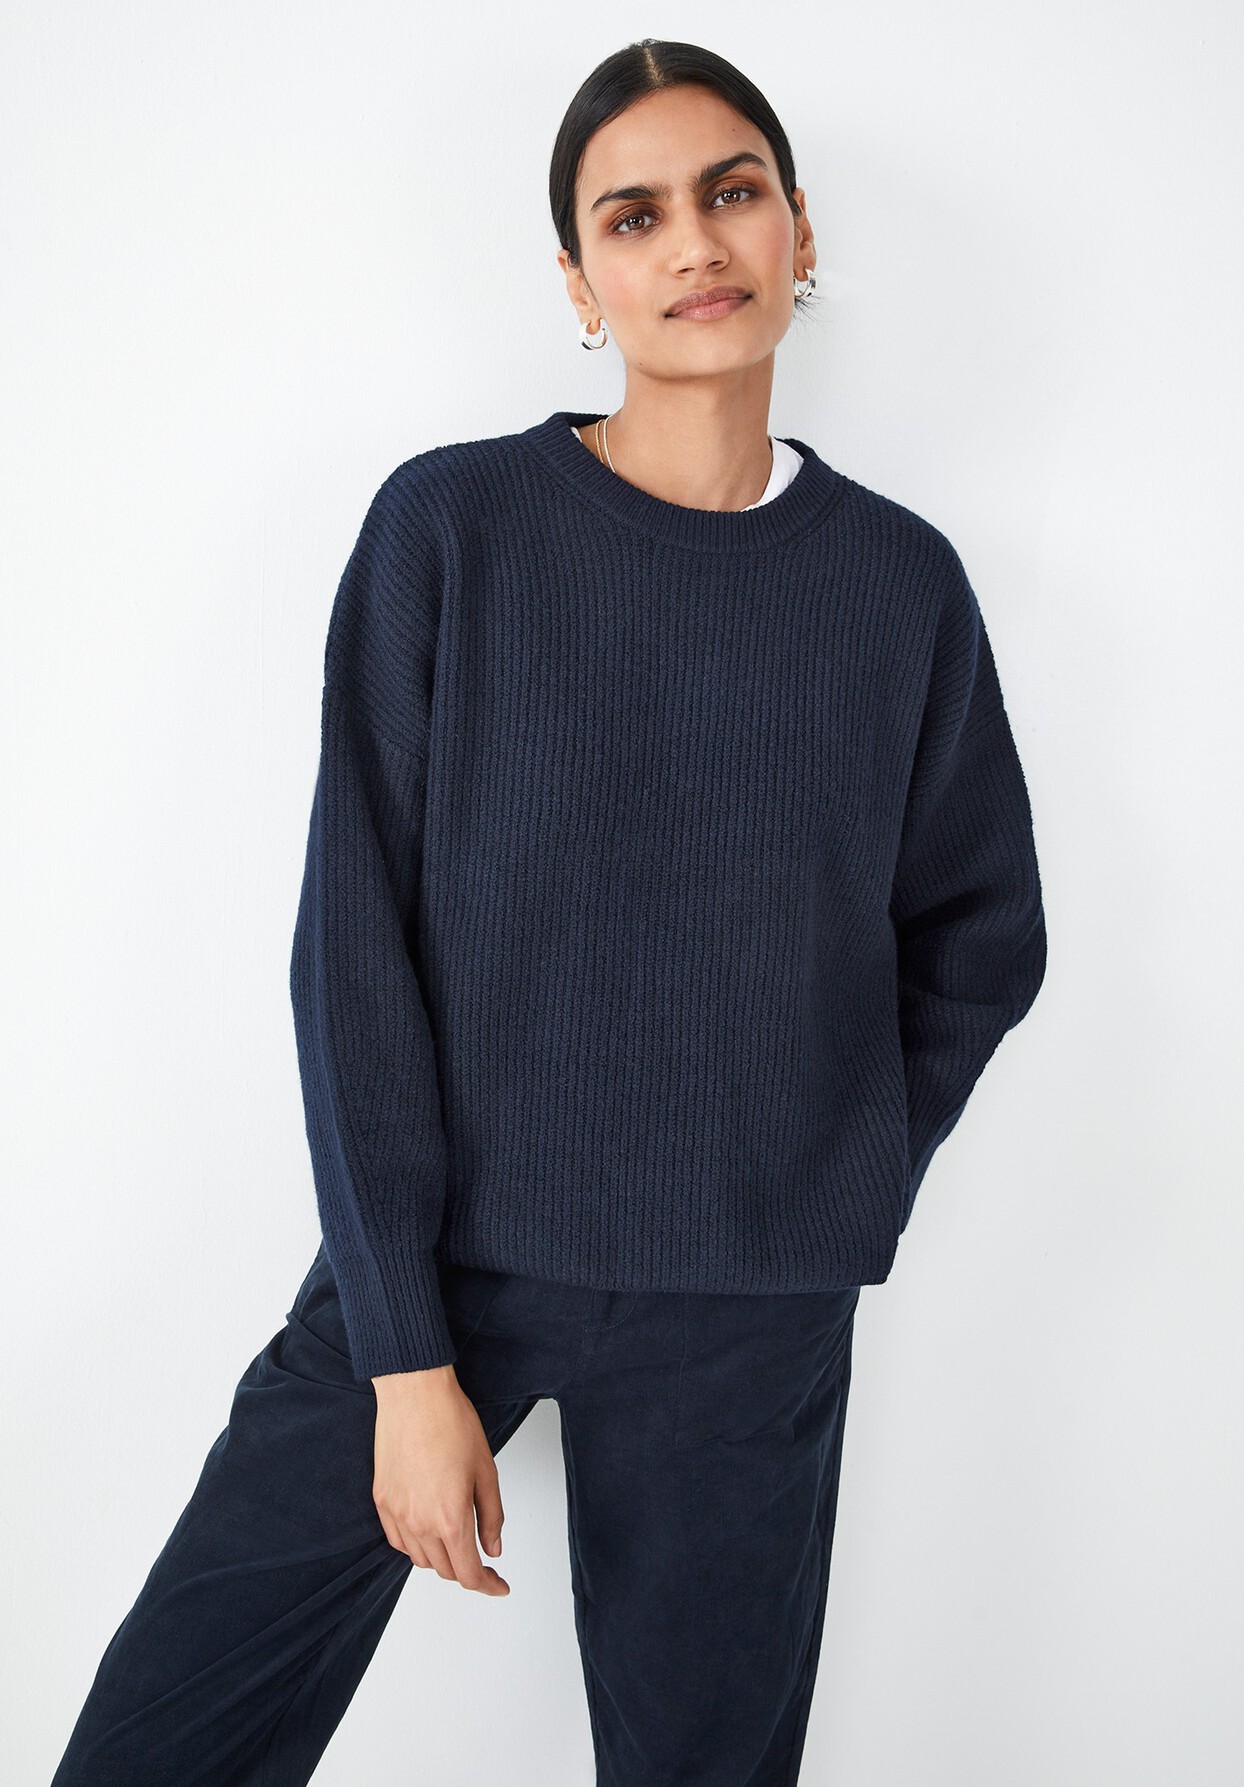 8 Jumper Outfits That'll Inspire You for the Next 6 Months | Who What ...